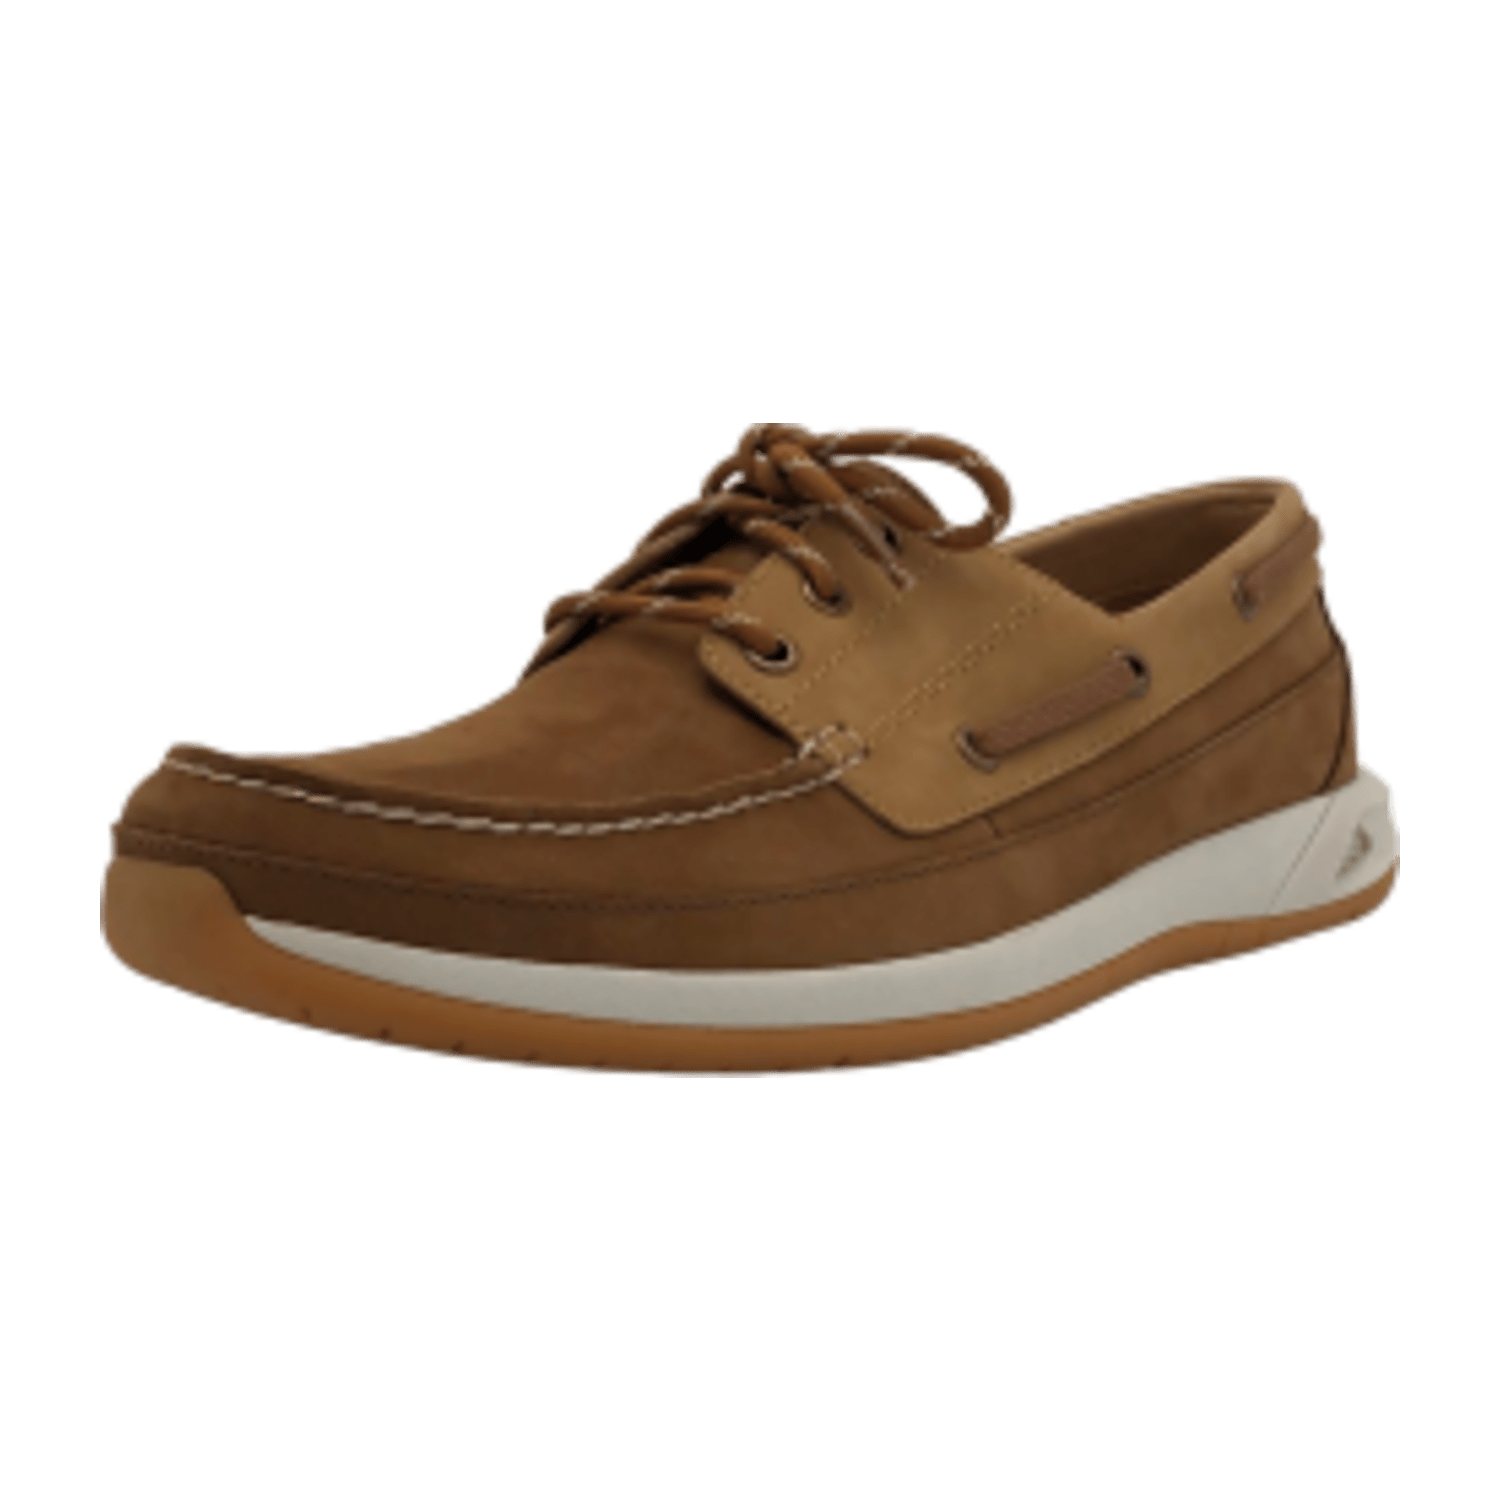 Clarks Ormand Boat